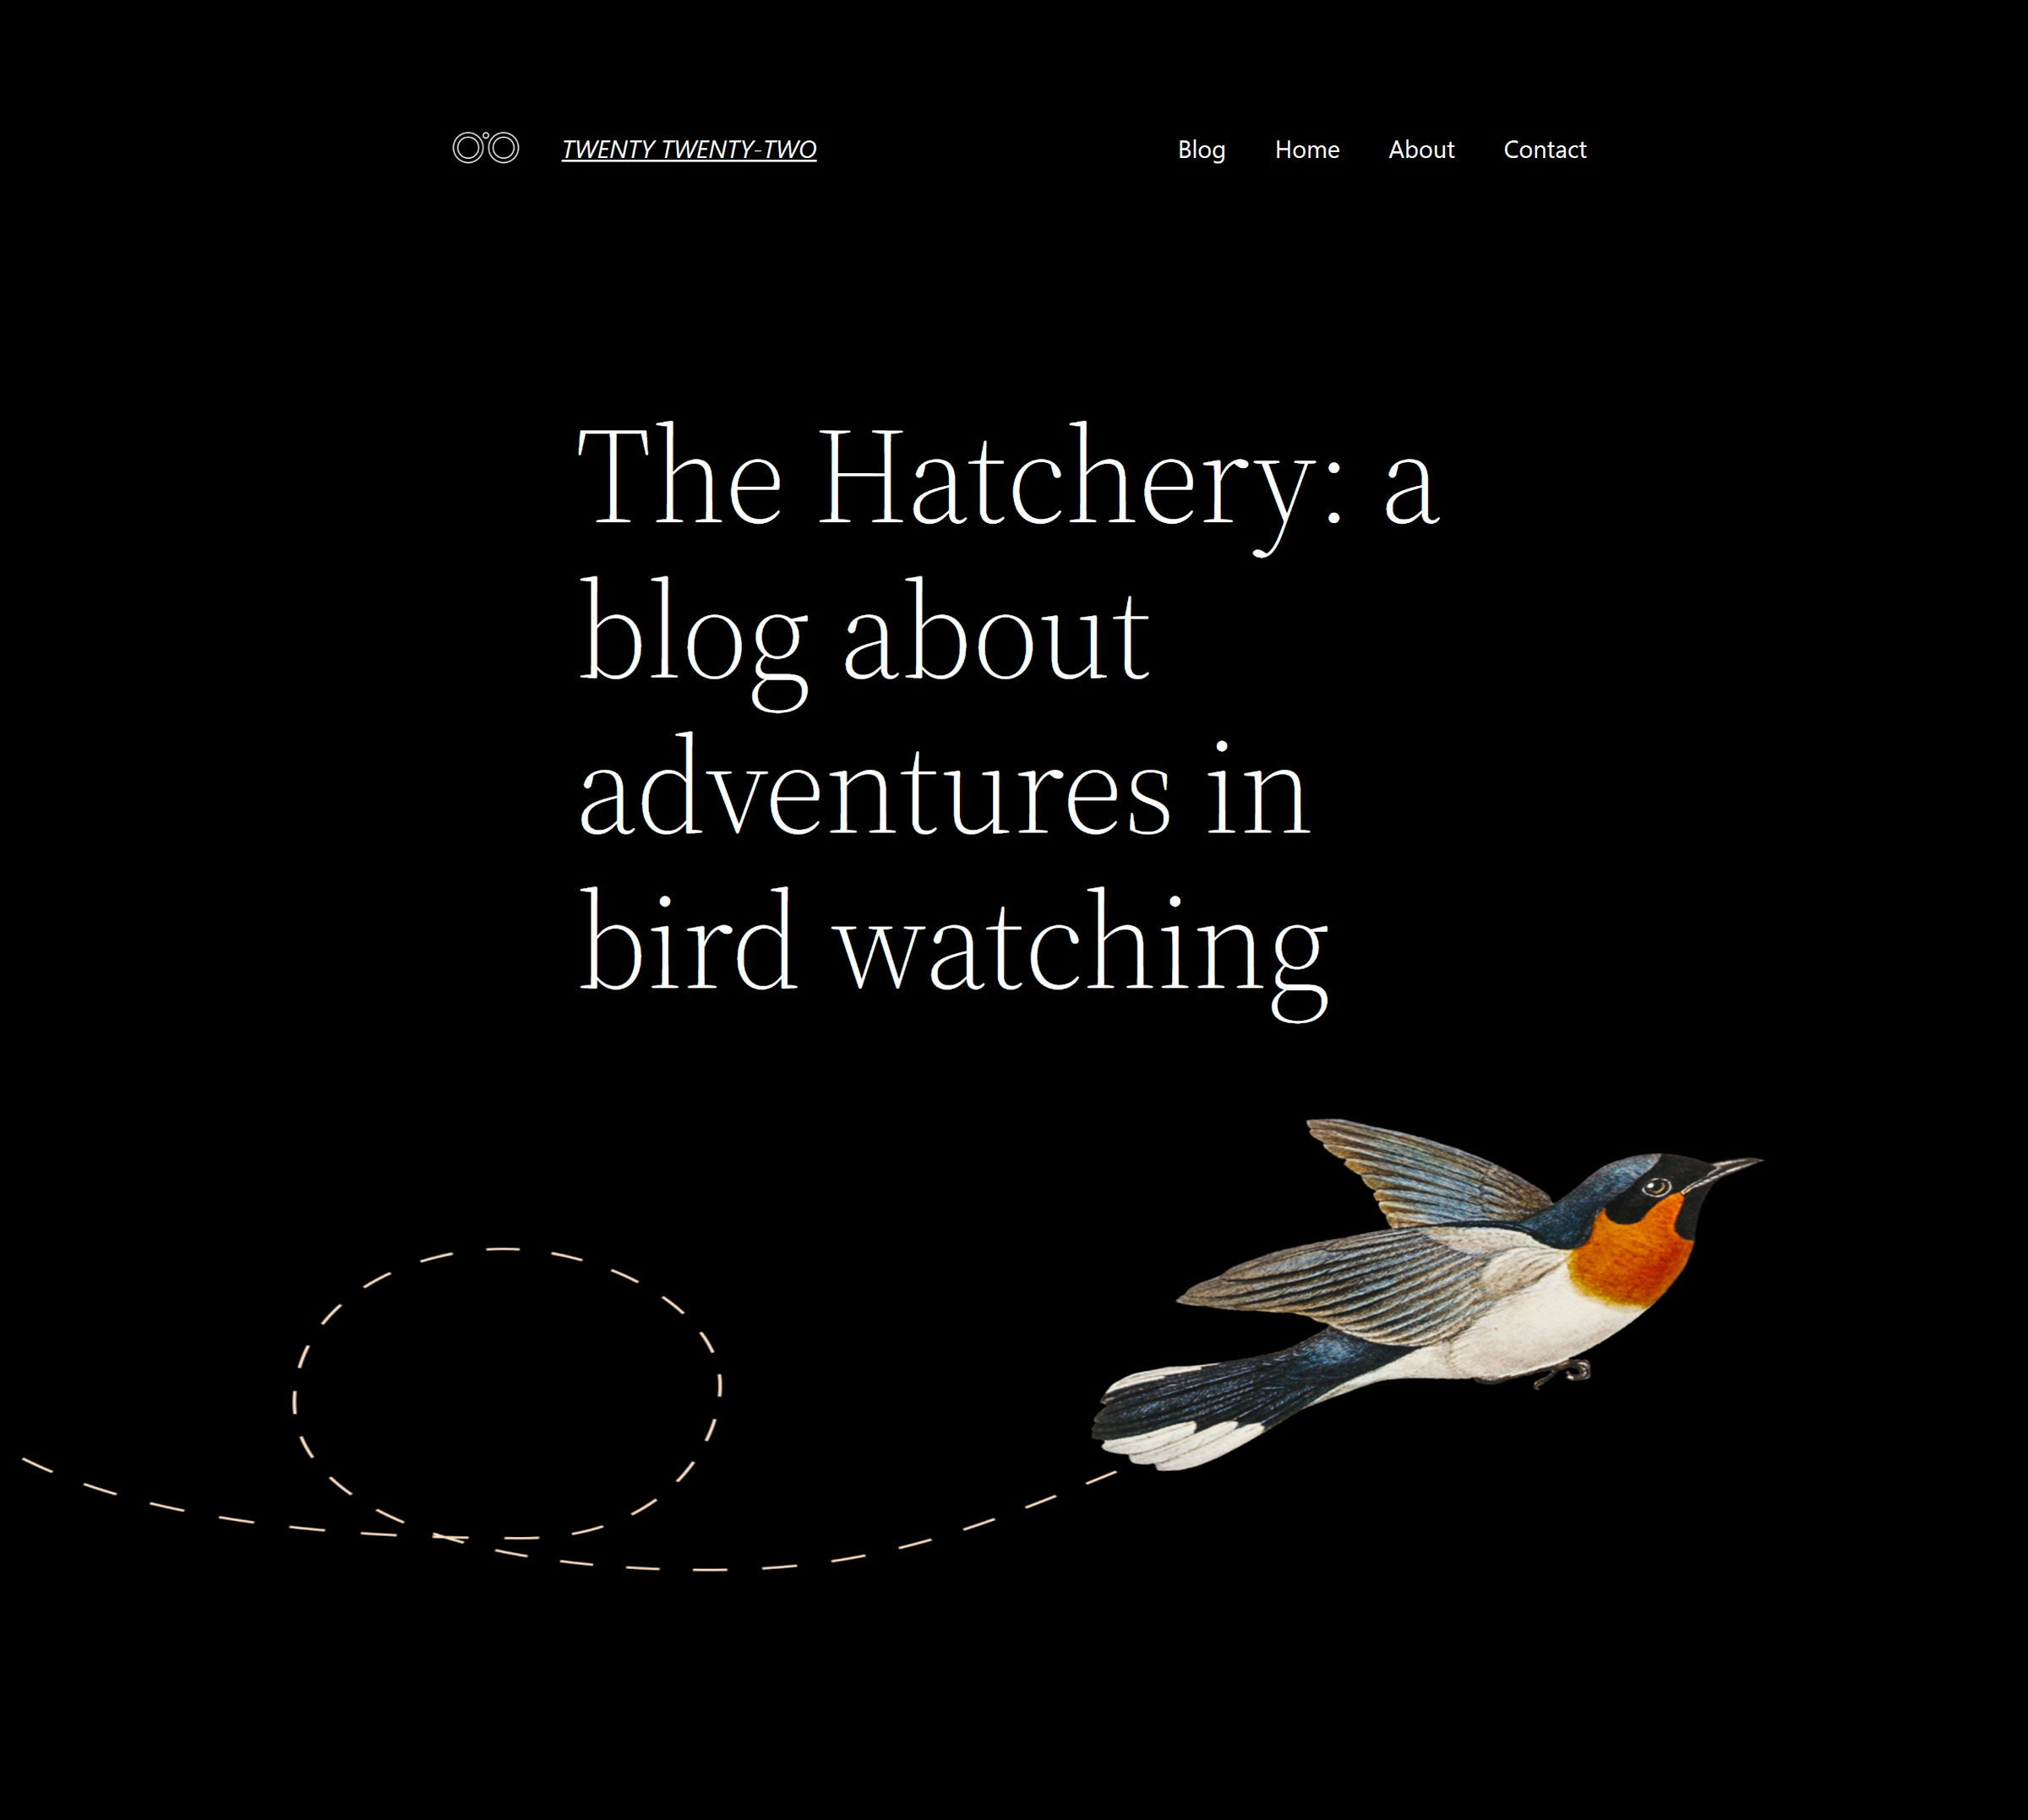 Homepage design of the Twenty Twenty-Two WordPress theme that features a black background with a large tagline and a flying bird image across the bottom.